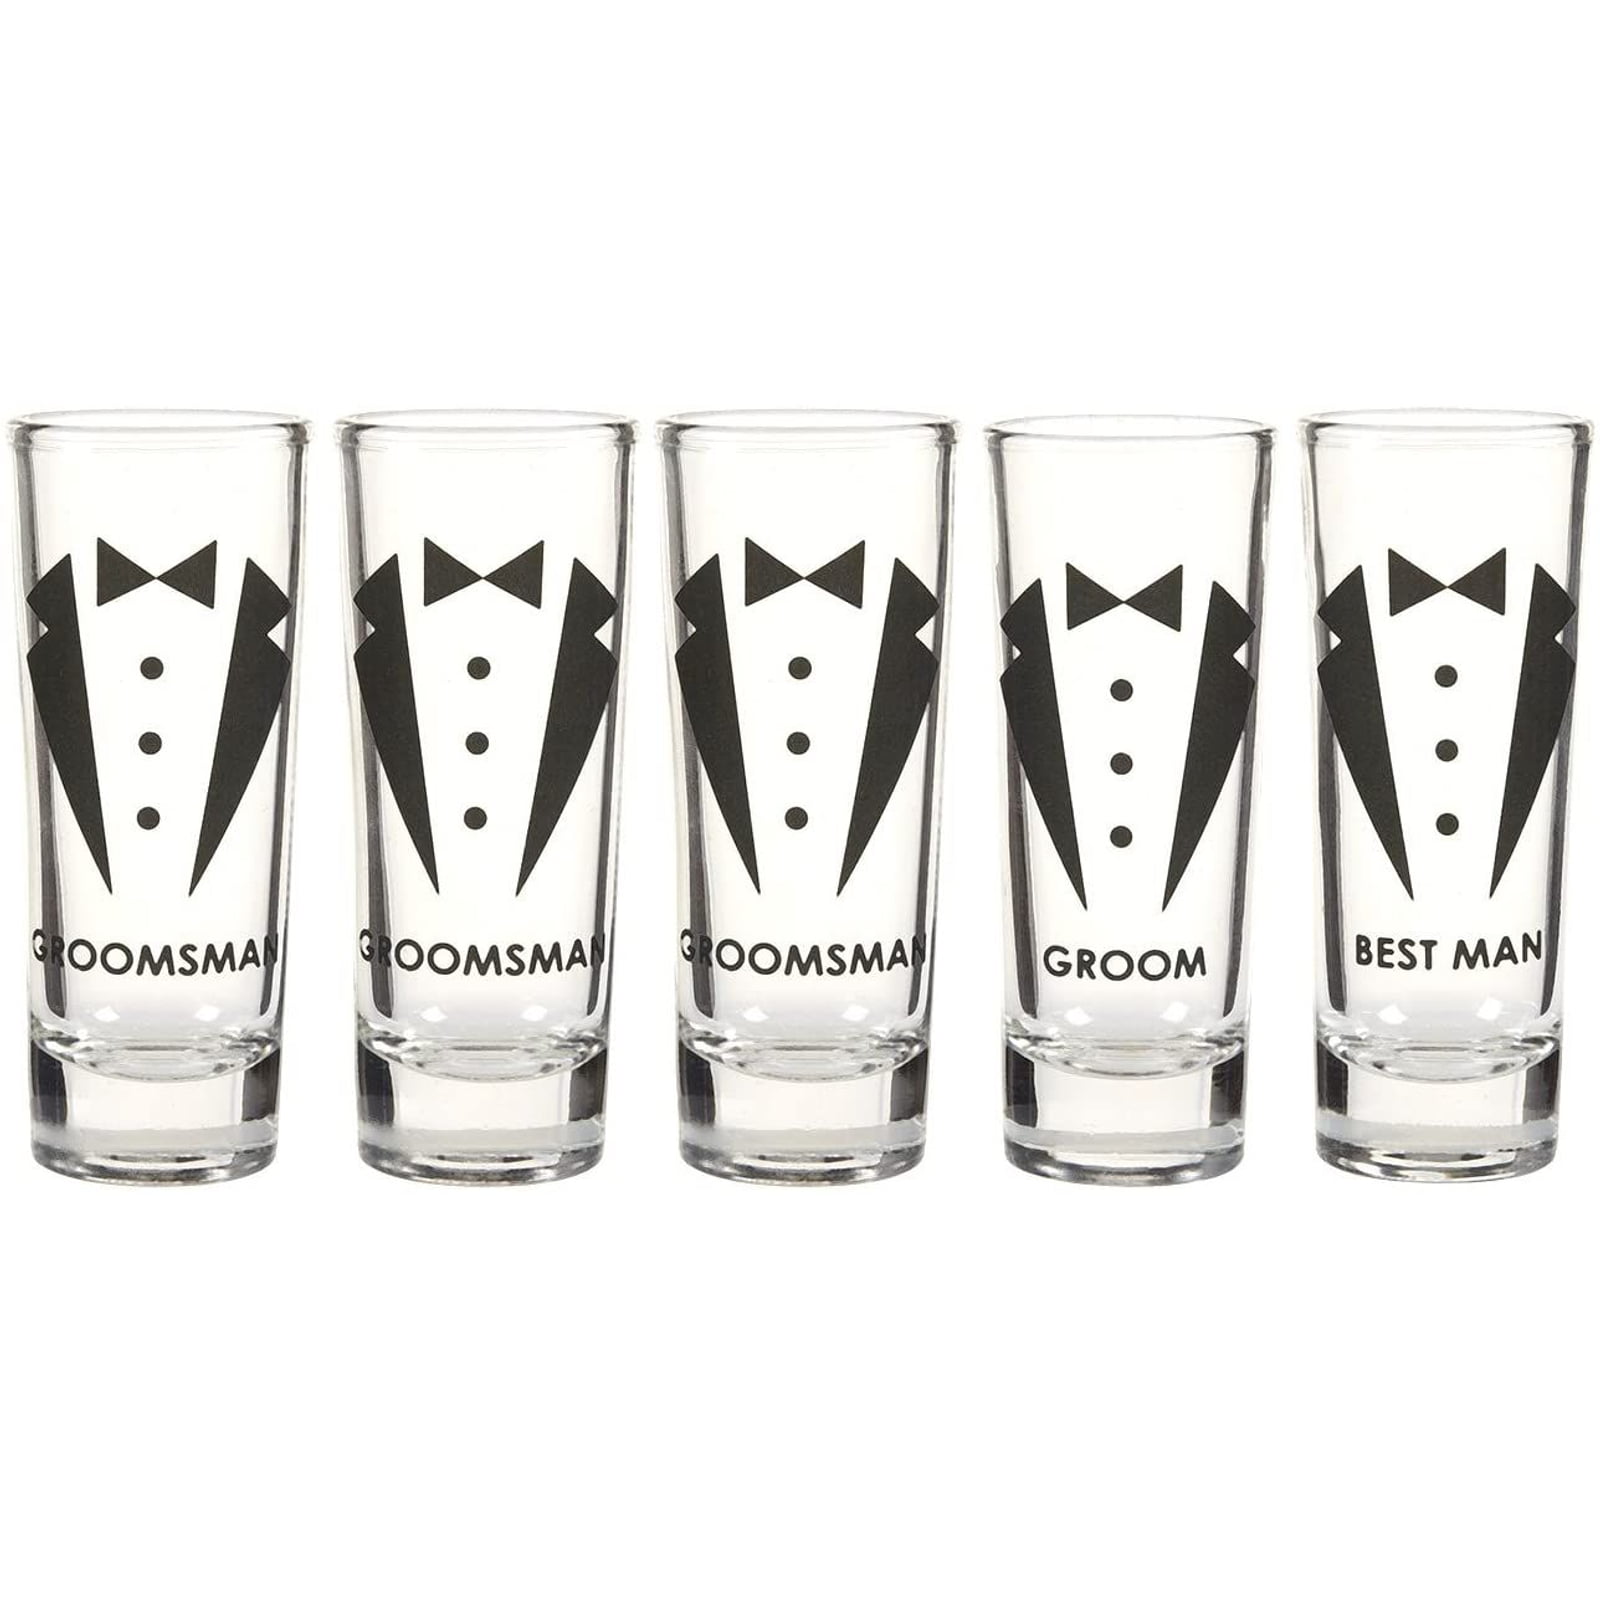 Set of 2 The Boss The Groom Hubby Wifey Shot Glass Drinking Couples Set Gift for Husband Wife Newlyweds Couple Bride Groom Bridal Shower